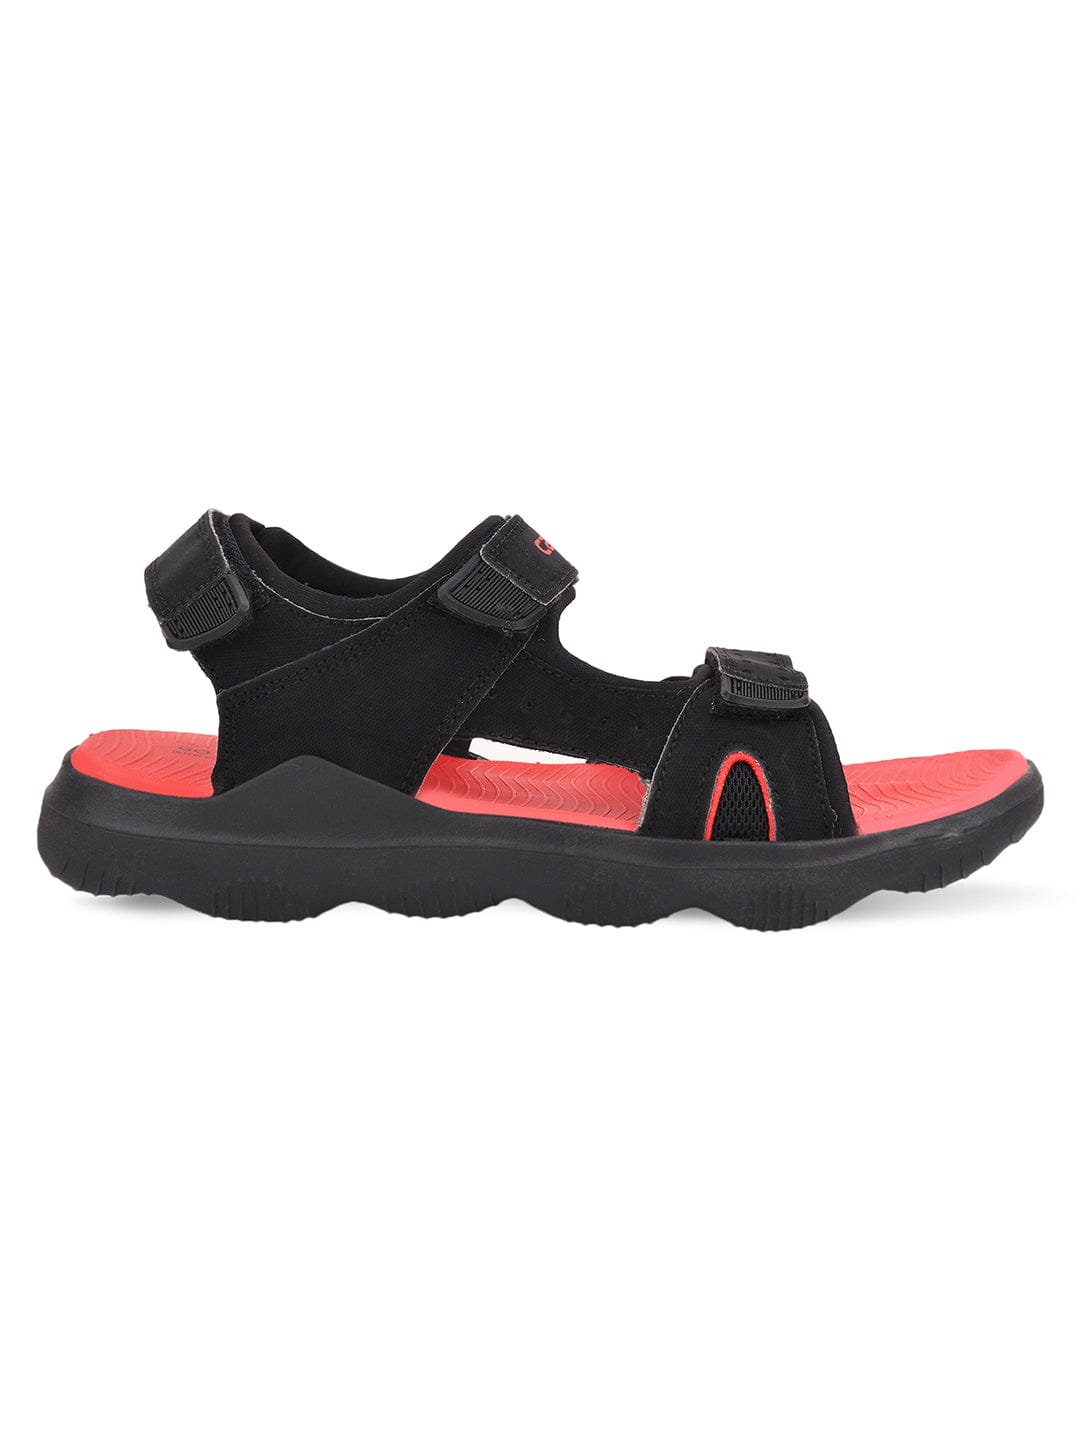 Black Leather Sandals for Men S – 5871 | Buy Leather Sandals Online – Zoom  Shoes India